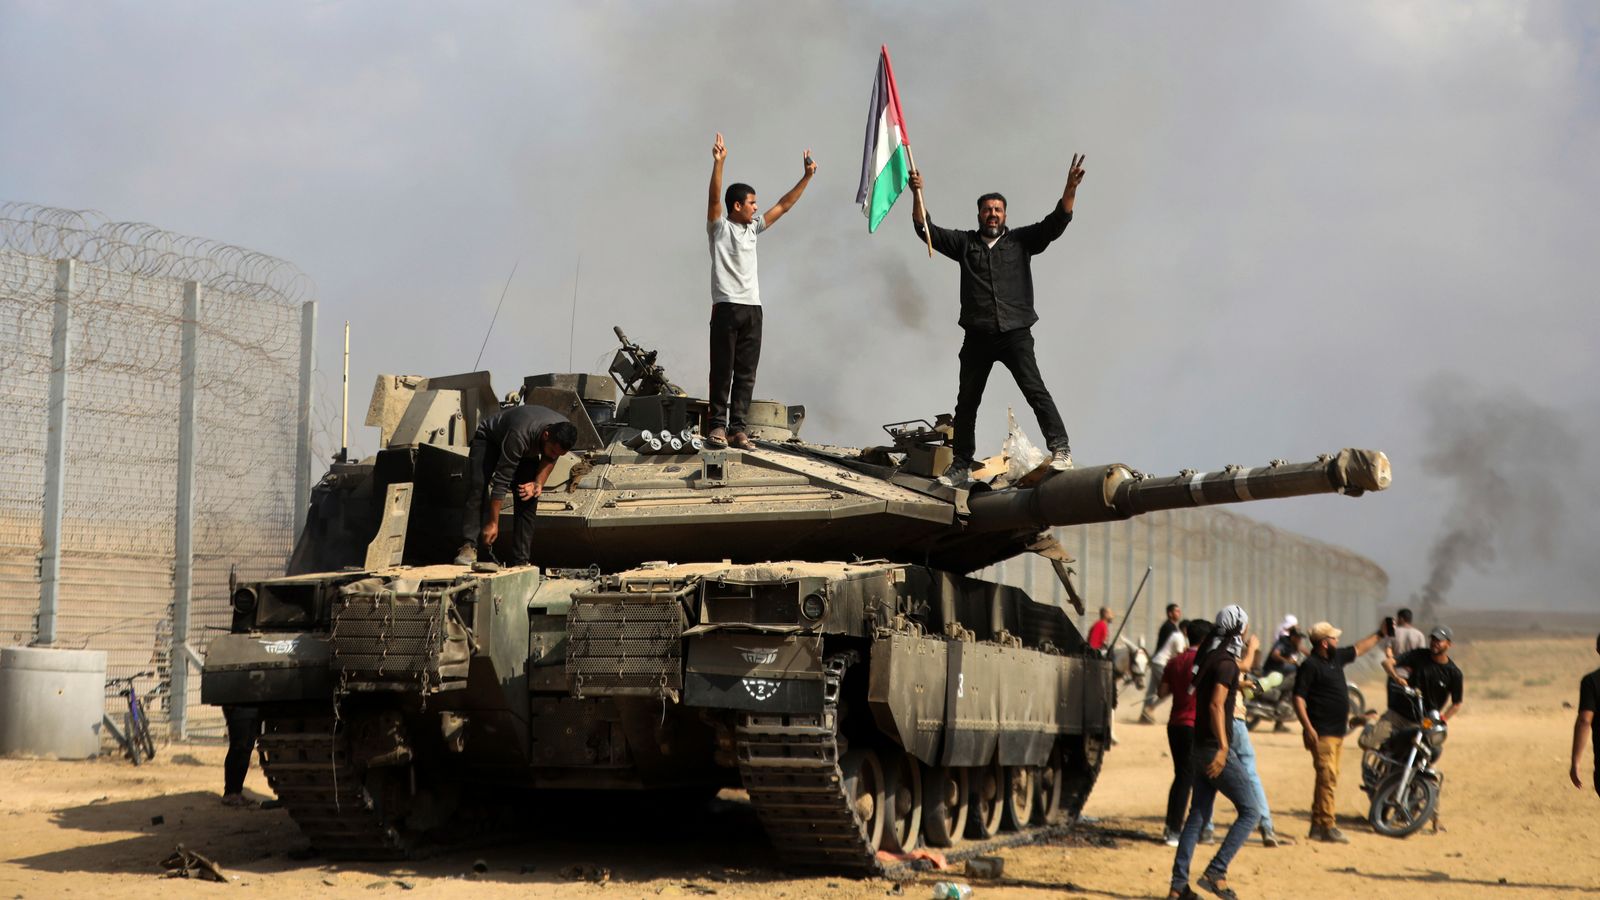 Palestinians wave their national flag by a destroyed Israeli tank at the Gaza Strip fence east of Khan Younis. Pic: AP